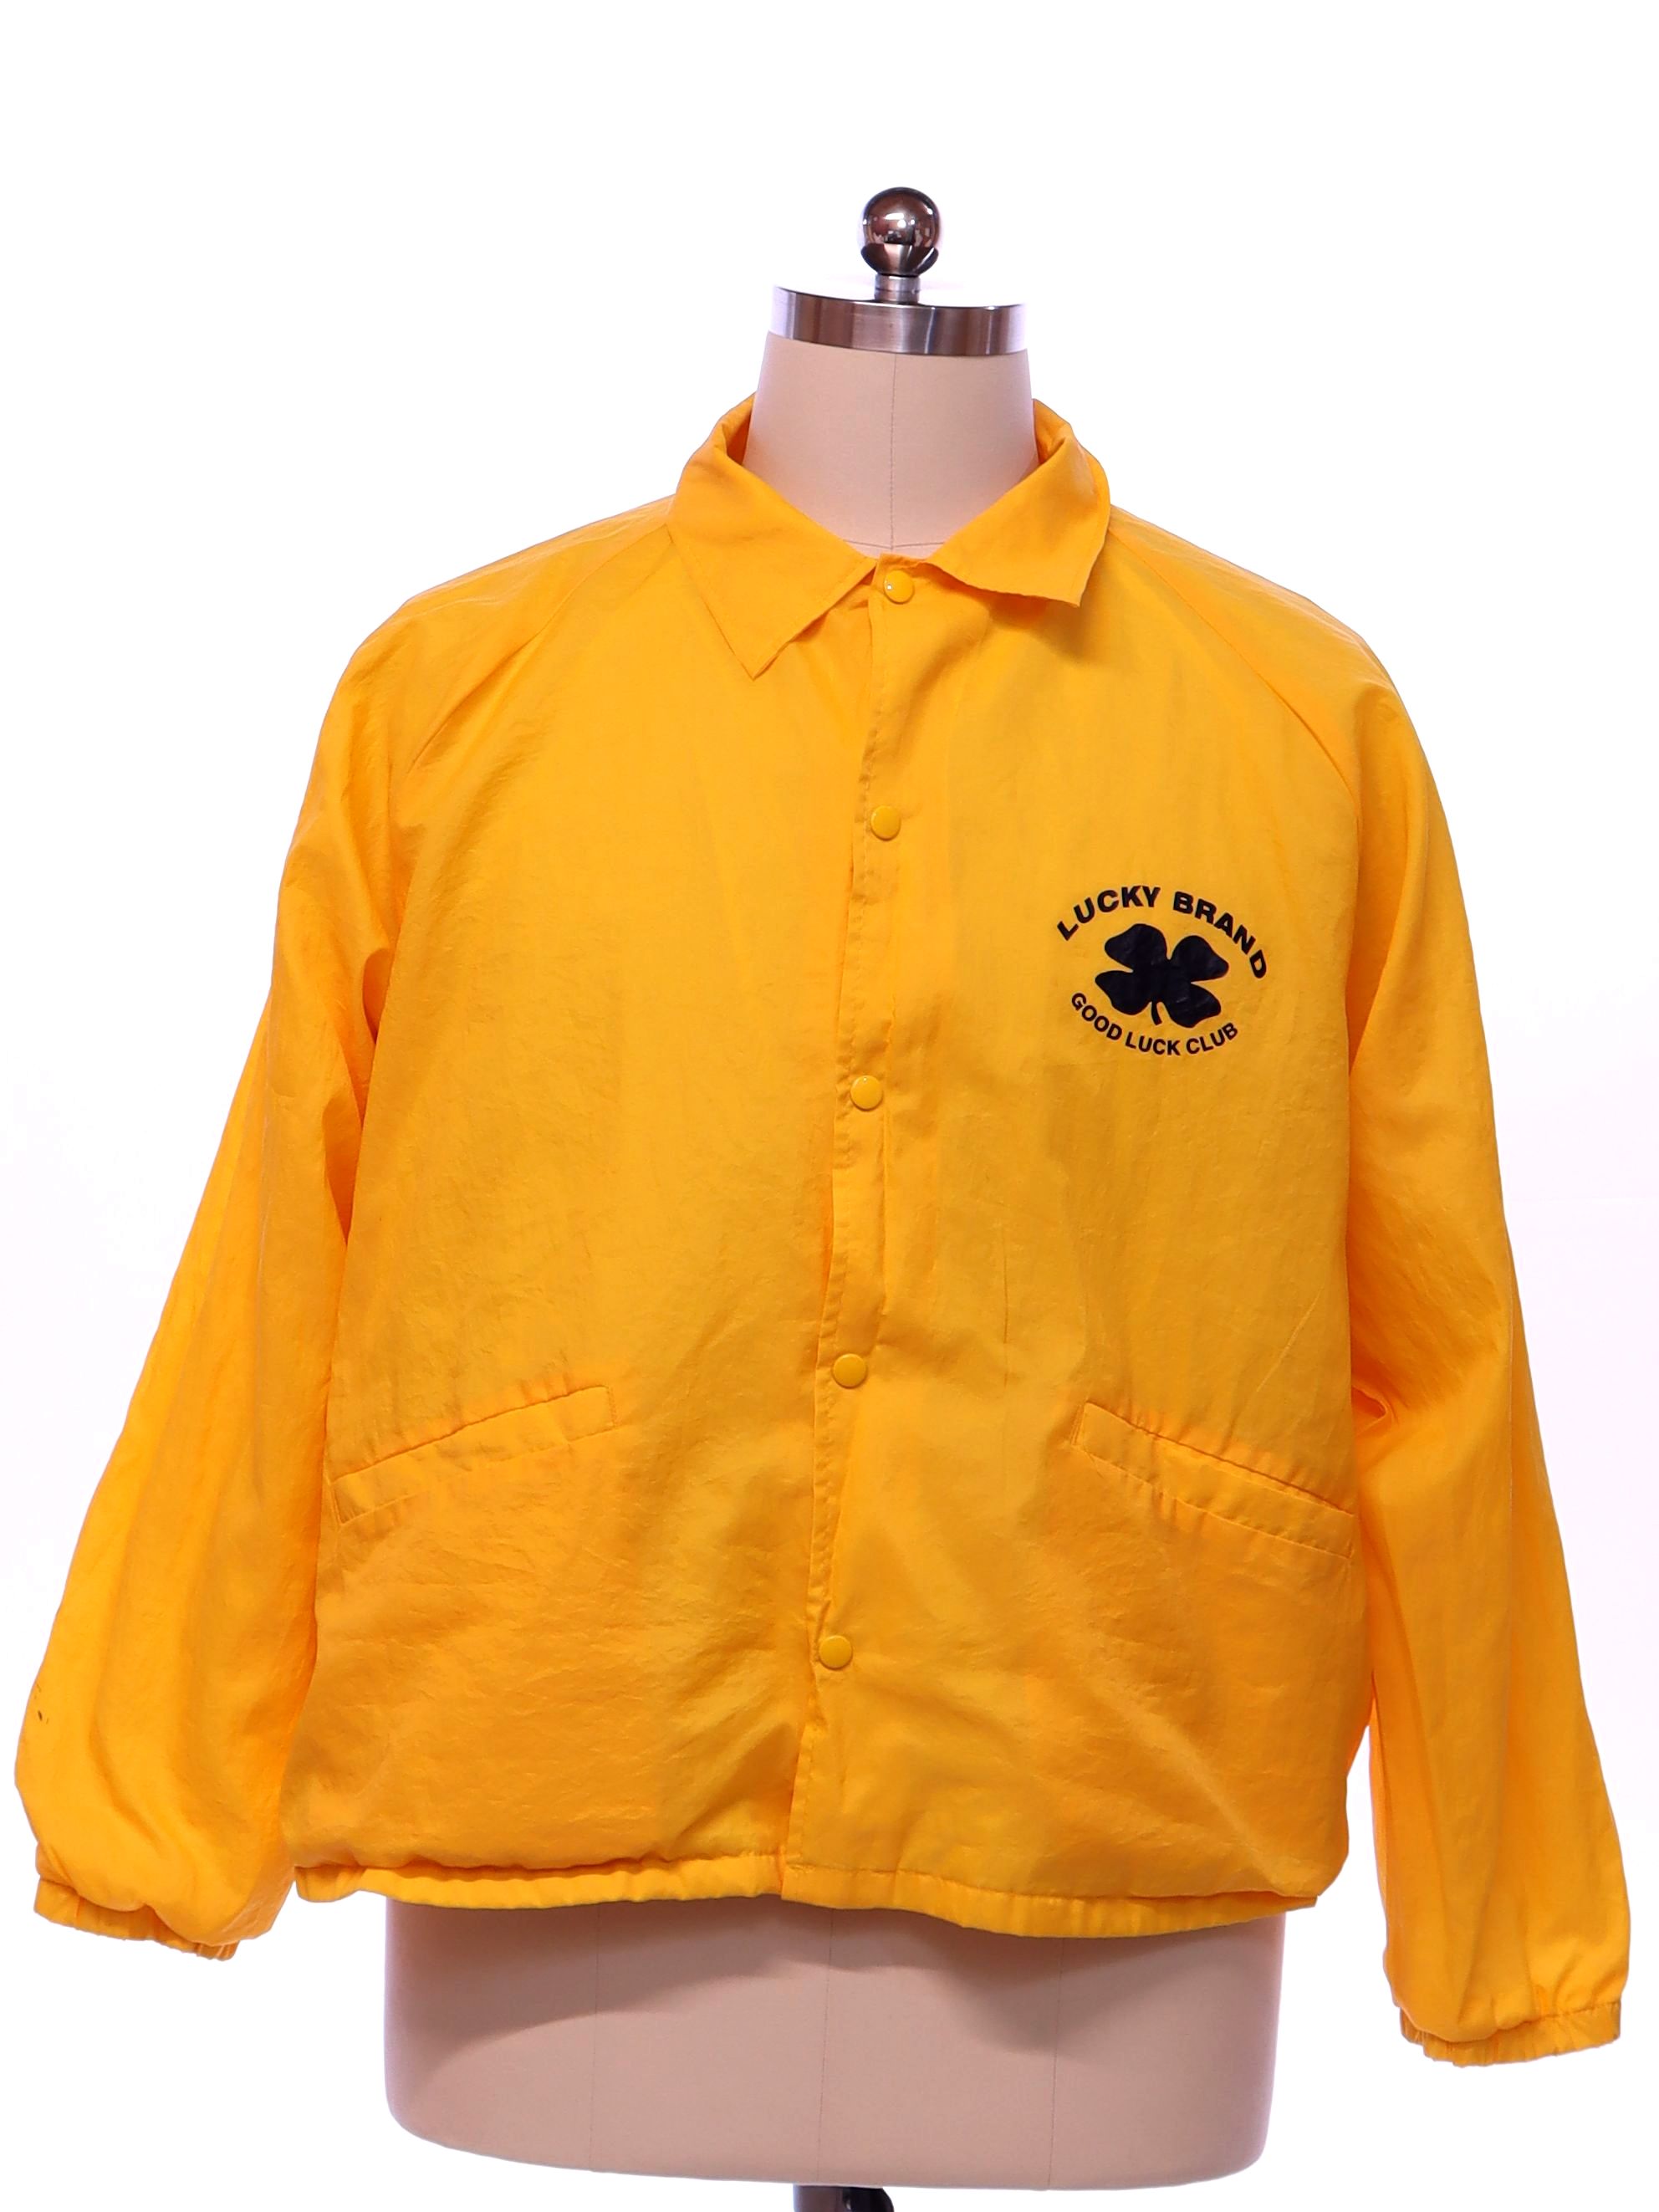 90s Retro Jacket: Late 90s or Early y2k 2000s -Lucky Brand- Mens bright  sunny yellow background nylon shell elastic cuff dolman longsleeve snap  front windbreaker snap front jacket. -Lucky Brand Good Luck